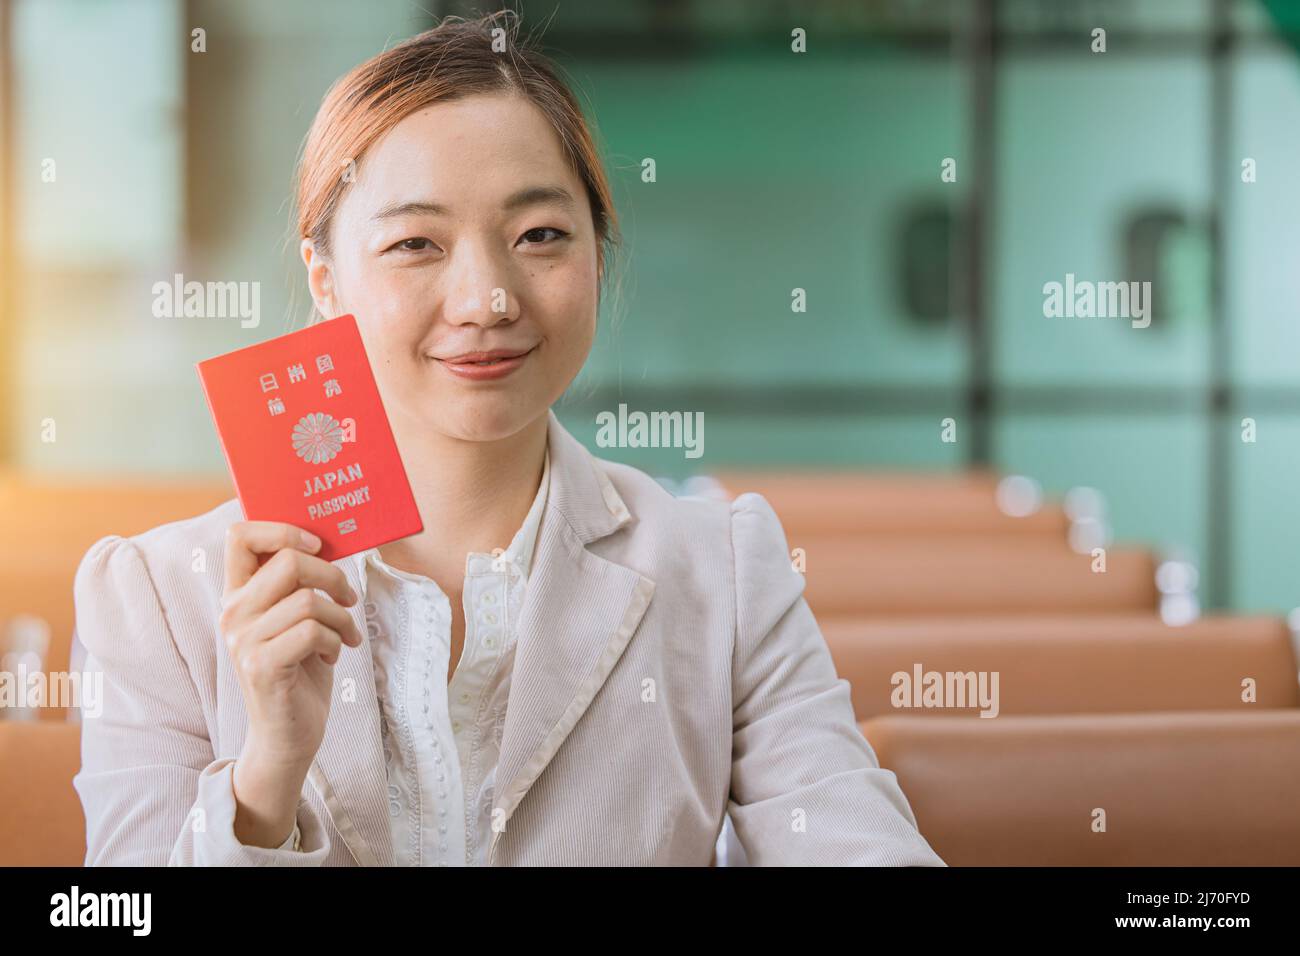 Japanese citizen woman smiling show japan passport at airport ready to flight travel to Japan home Stock Photo